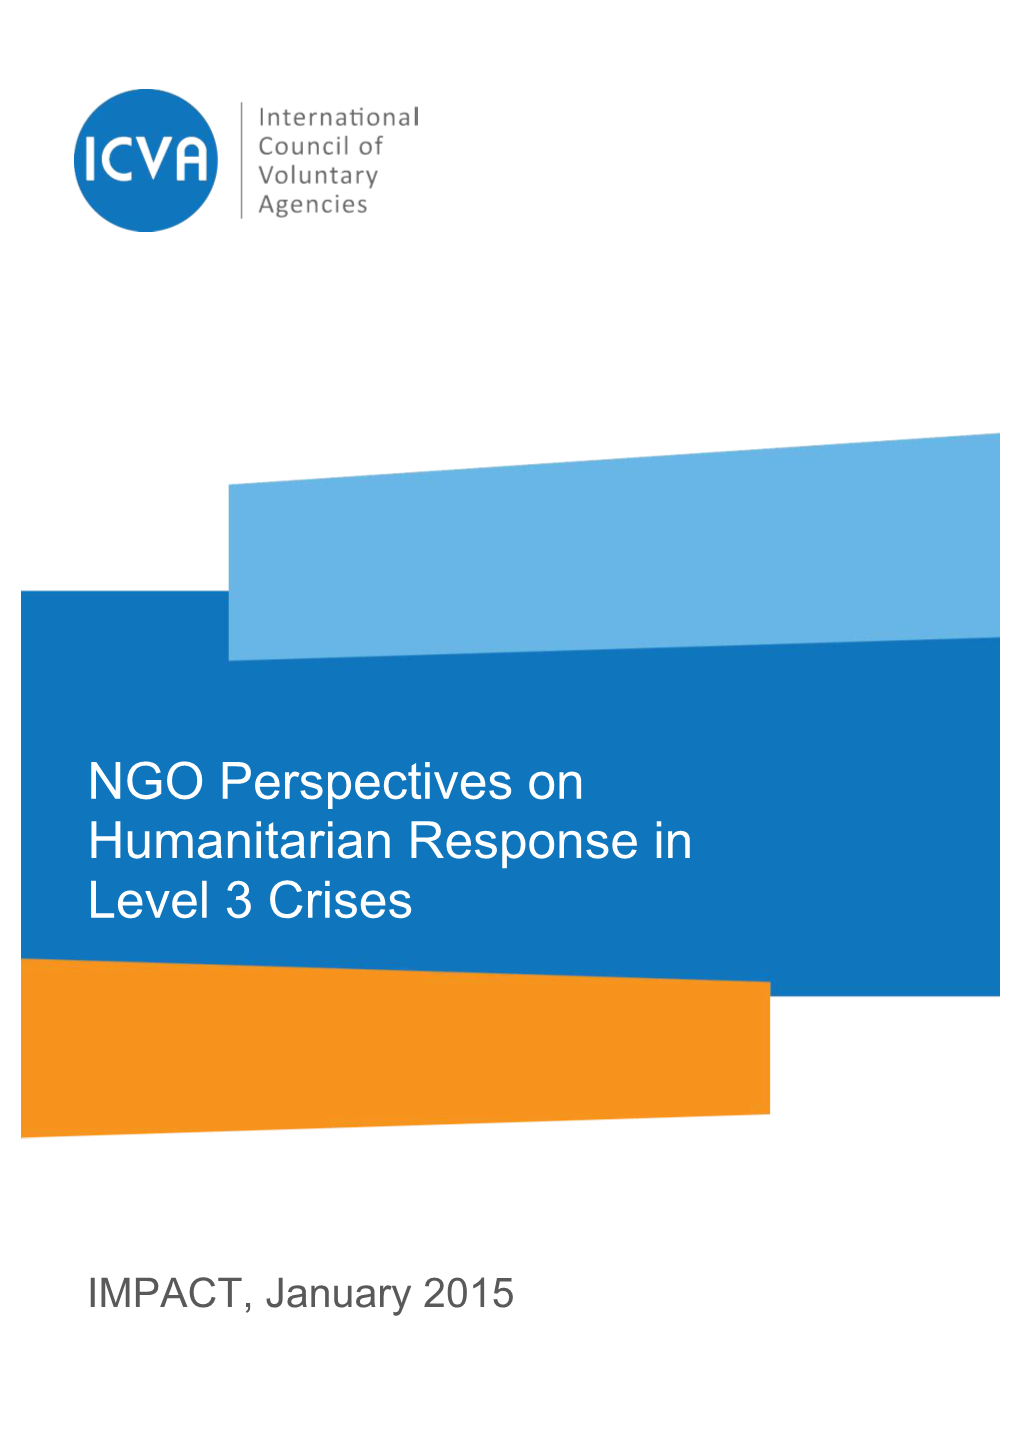 NGO Perspectives on Humanitarian Response in Level 3 Crises